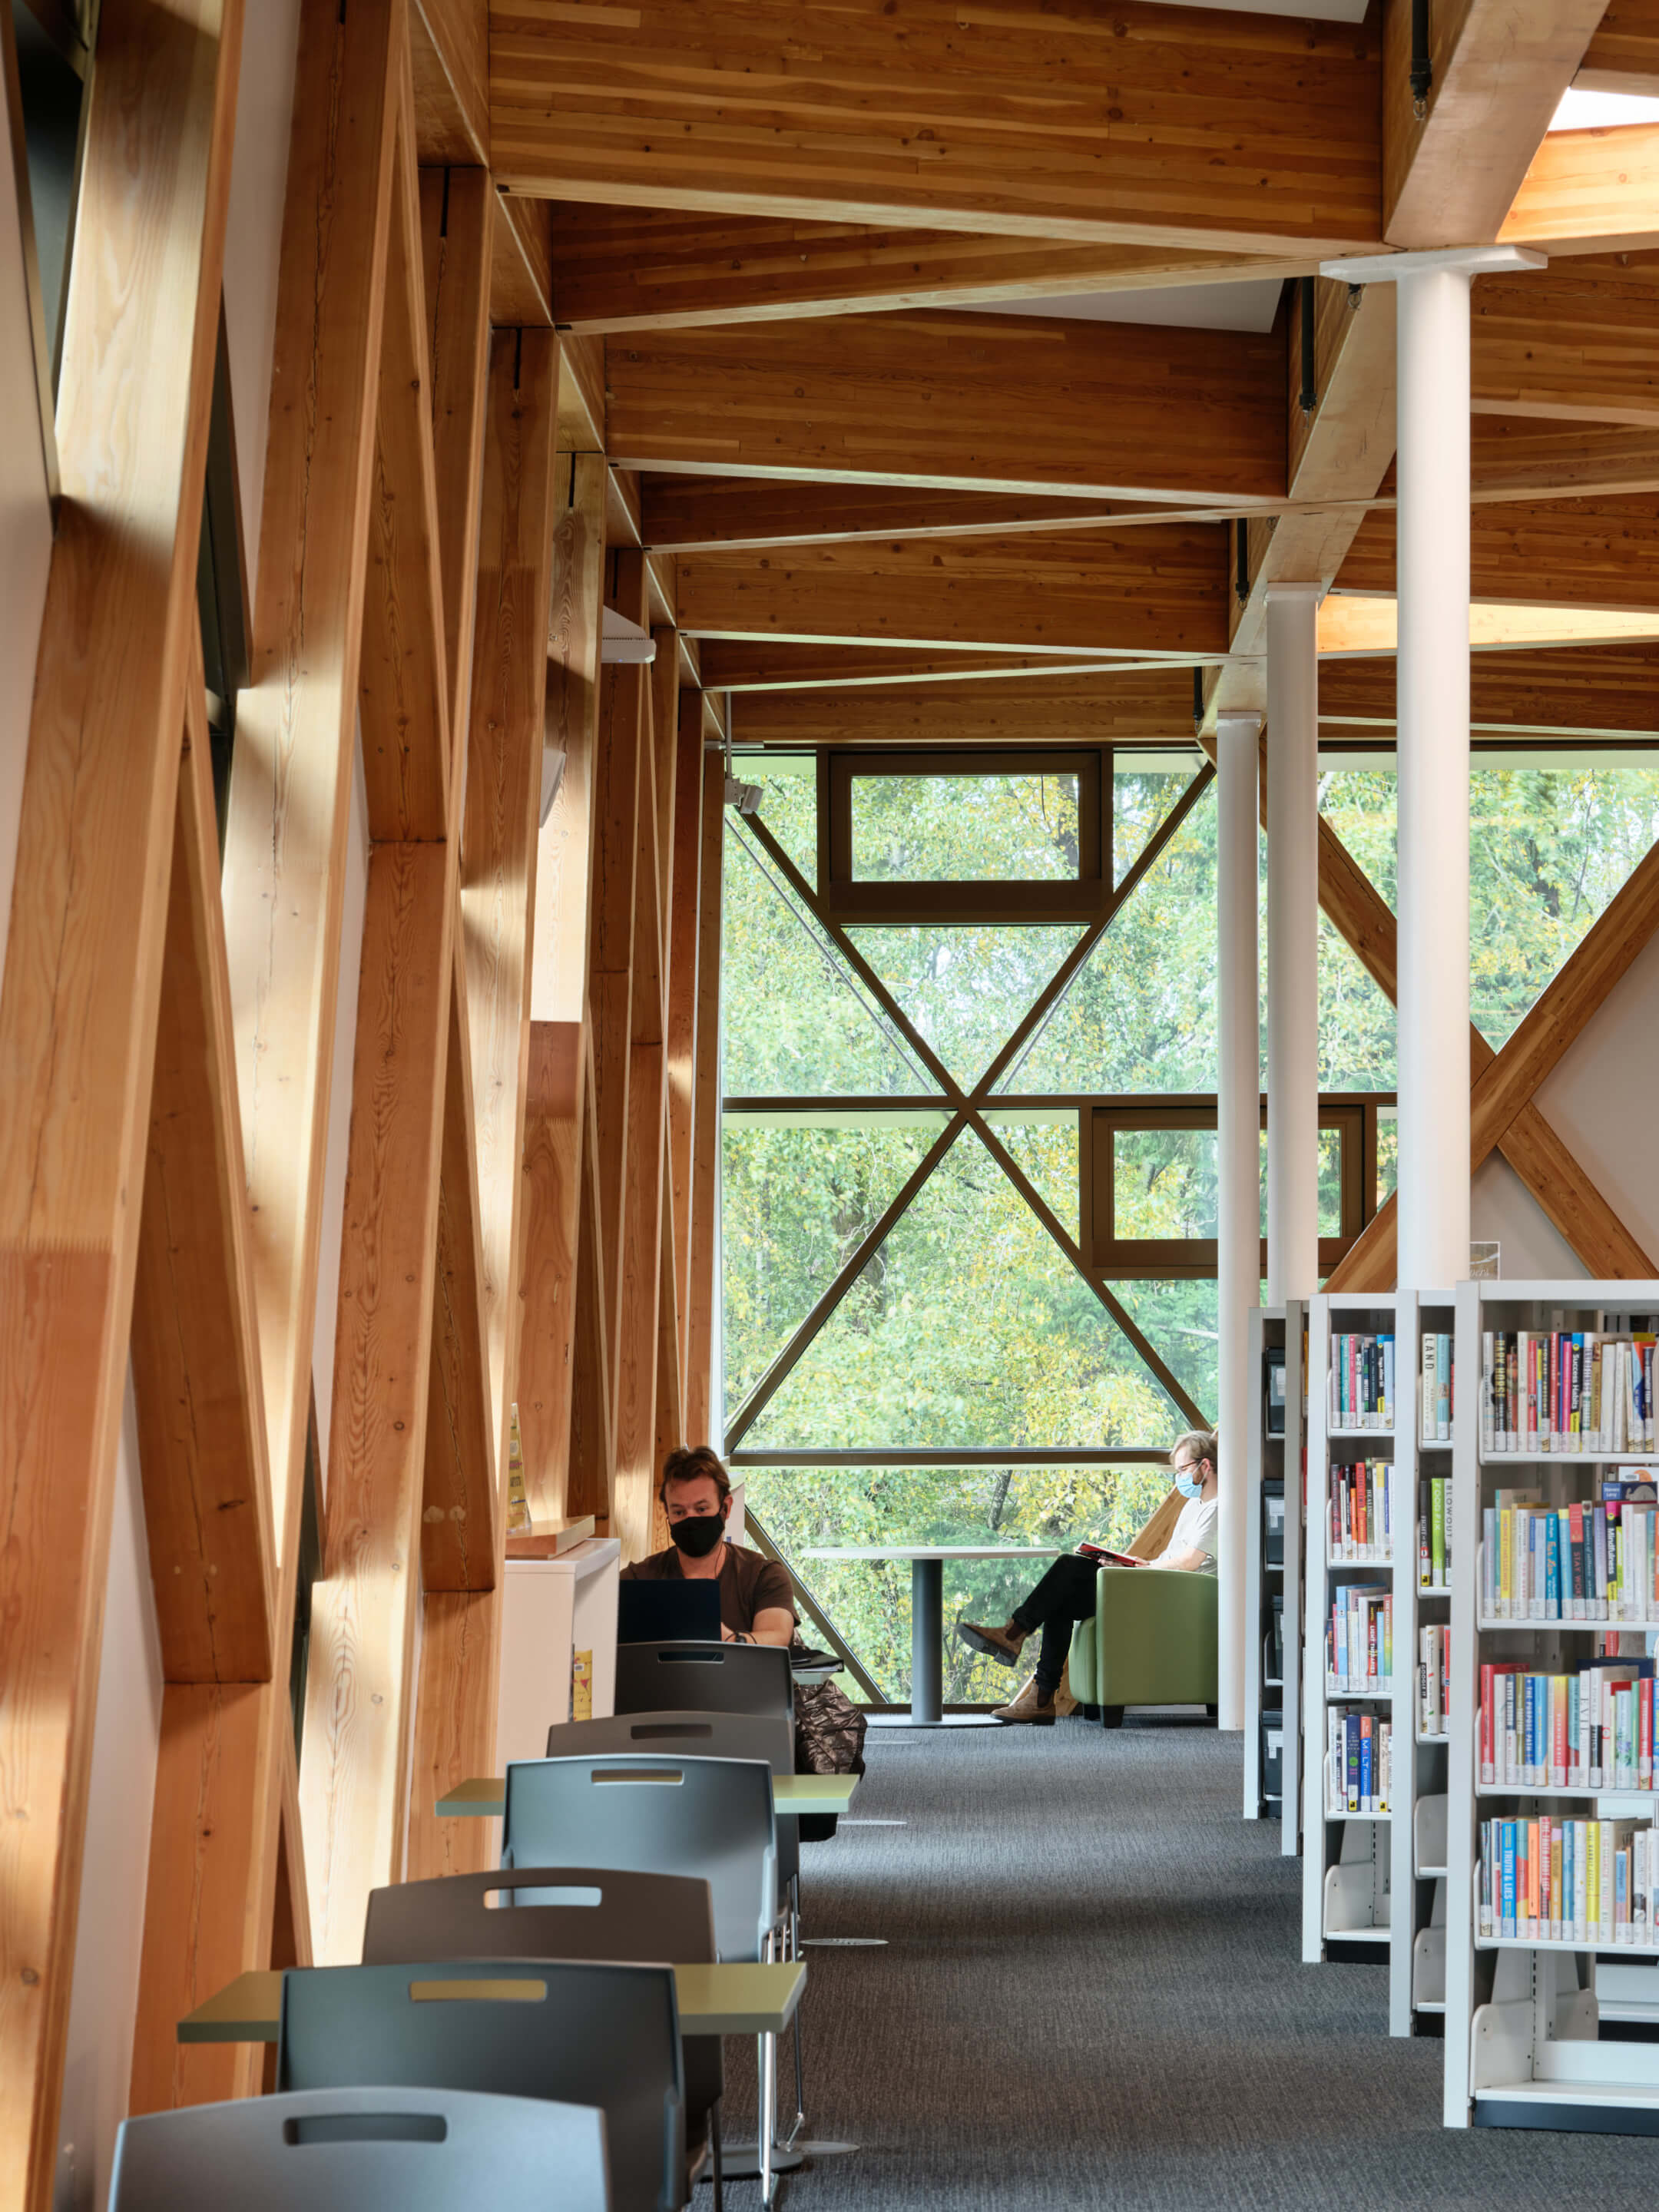 patrons sit inside a library with timber features